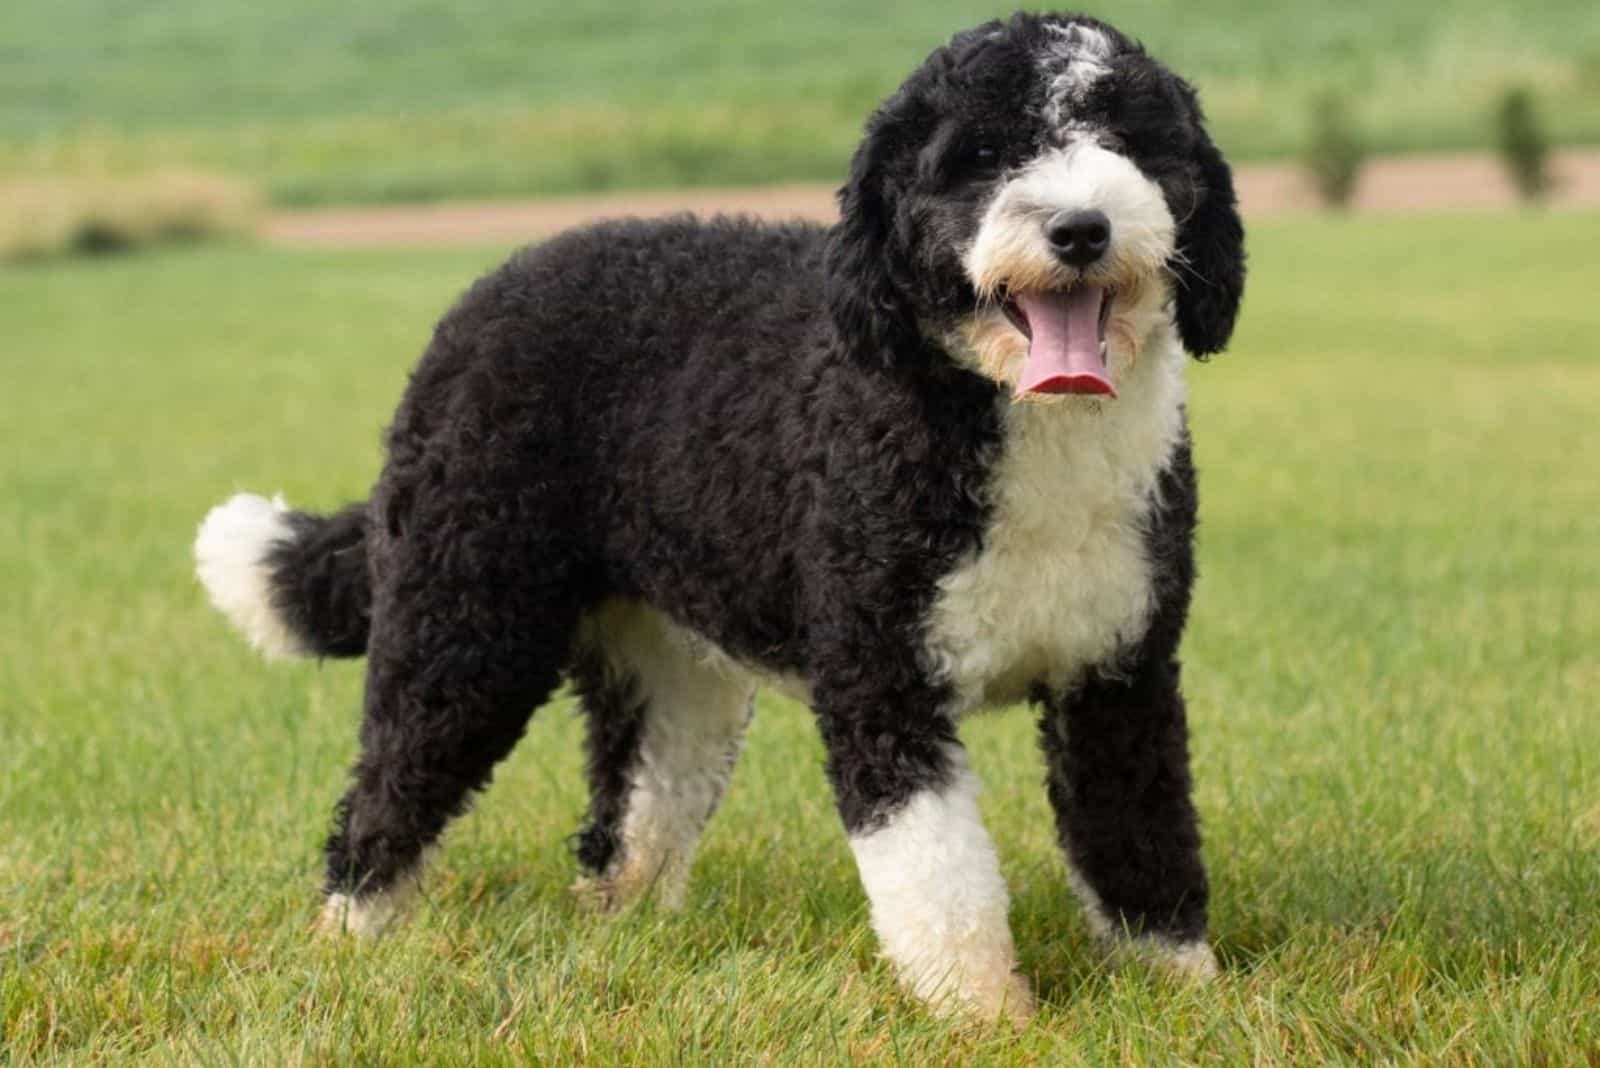 Sheepadoodle stands in a field of grass